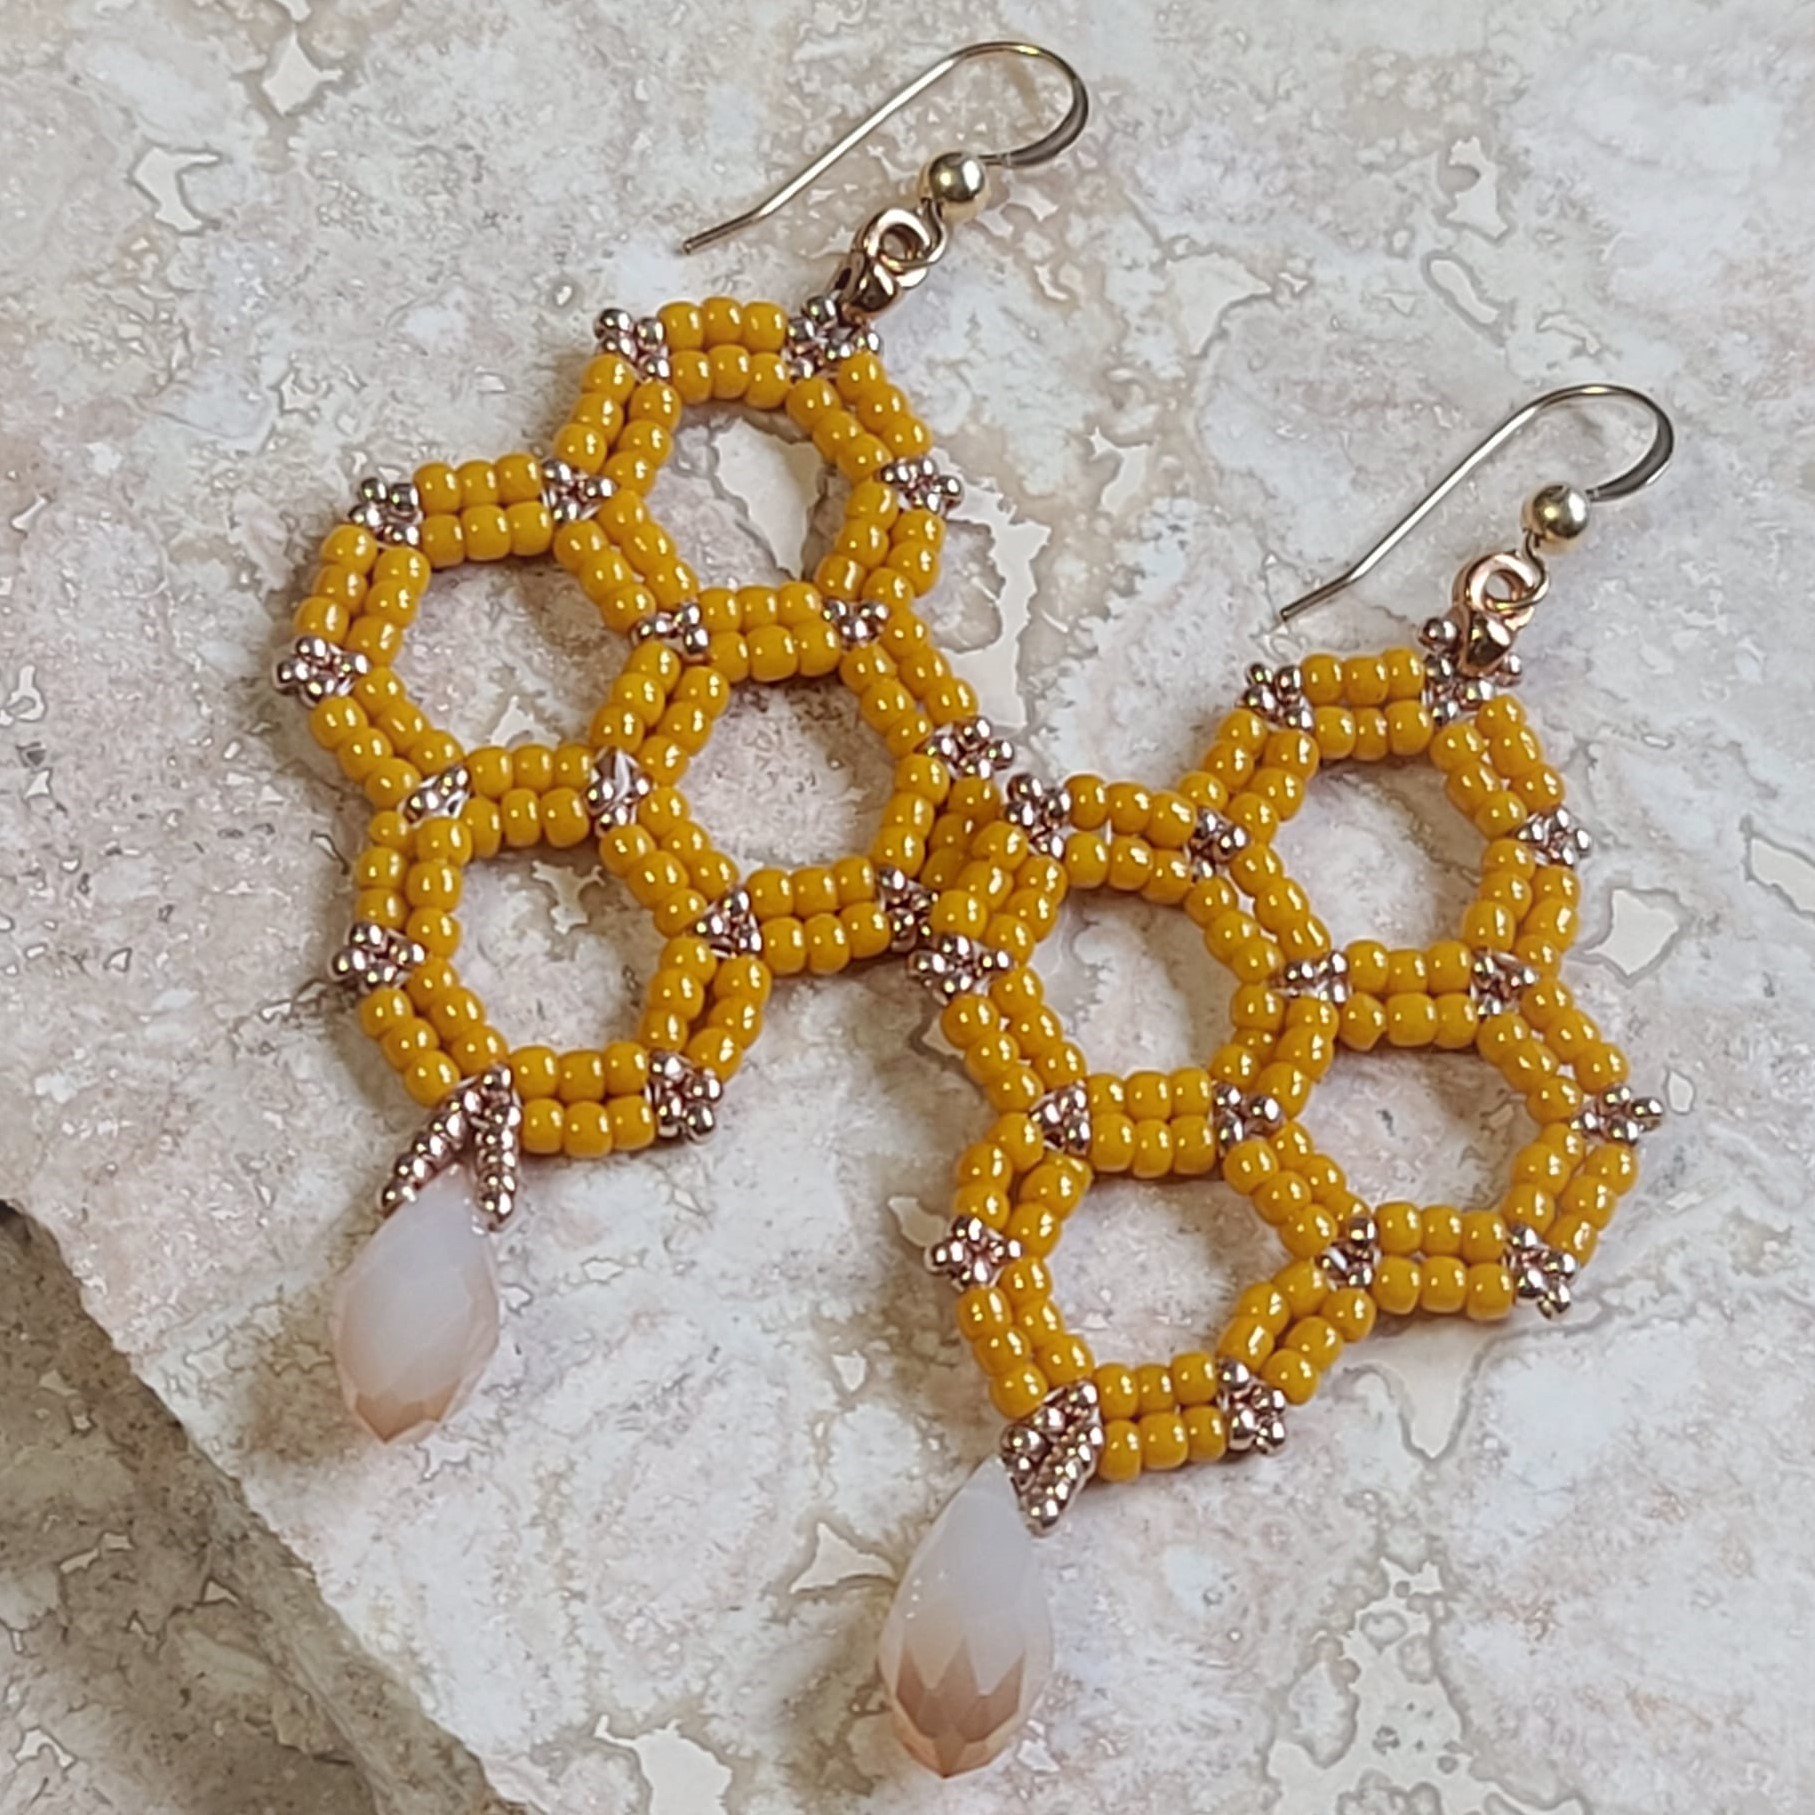 Handmade Seed Bead Earrings, Honeycomb Earrings 24kt Gold fill - Click Image to Close